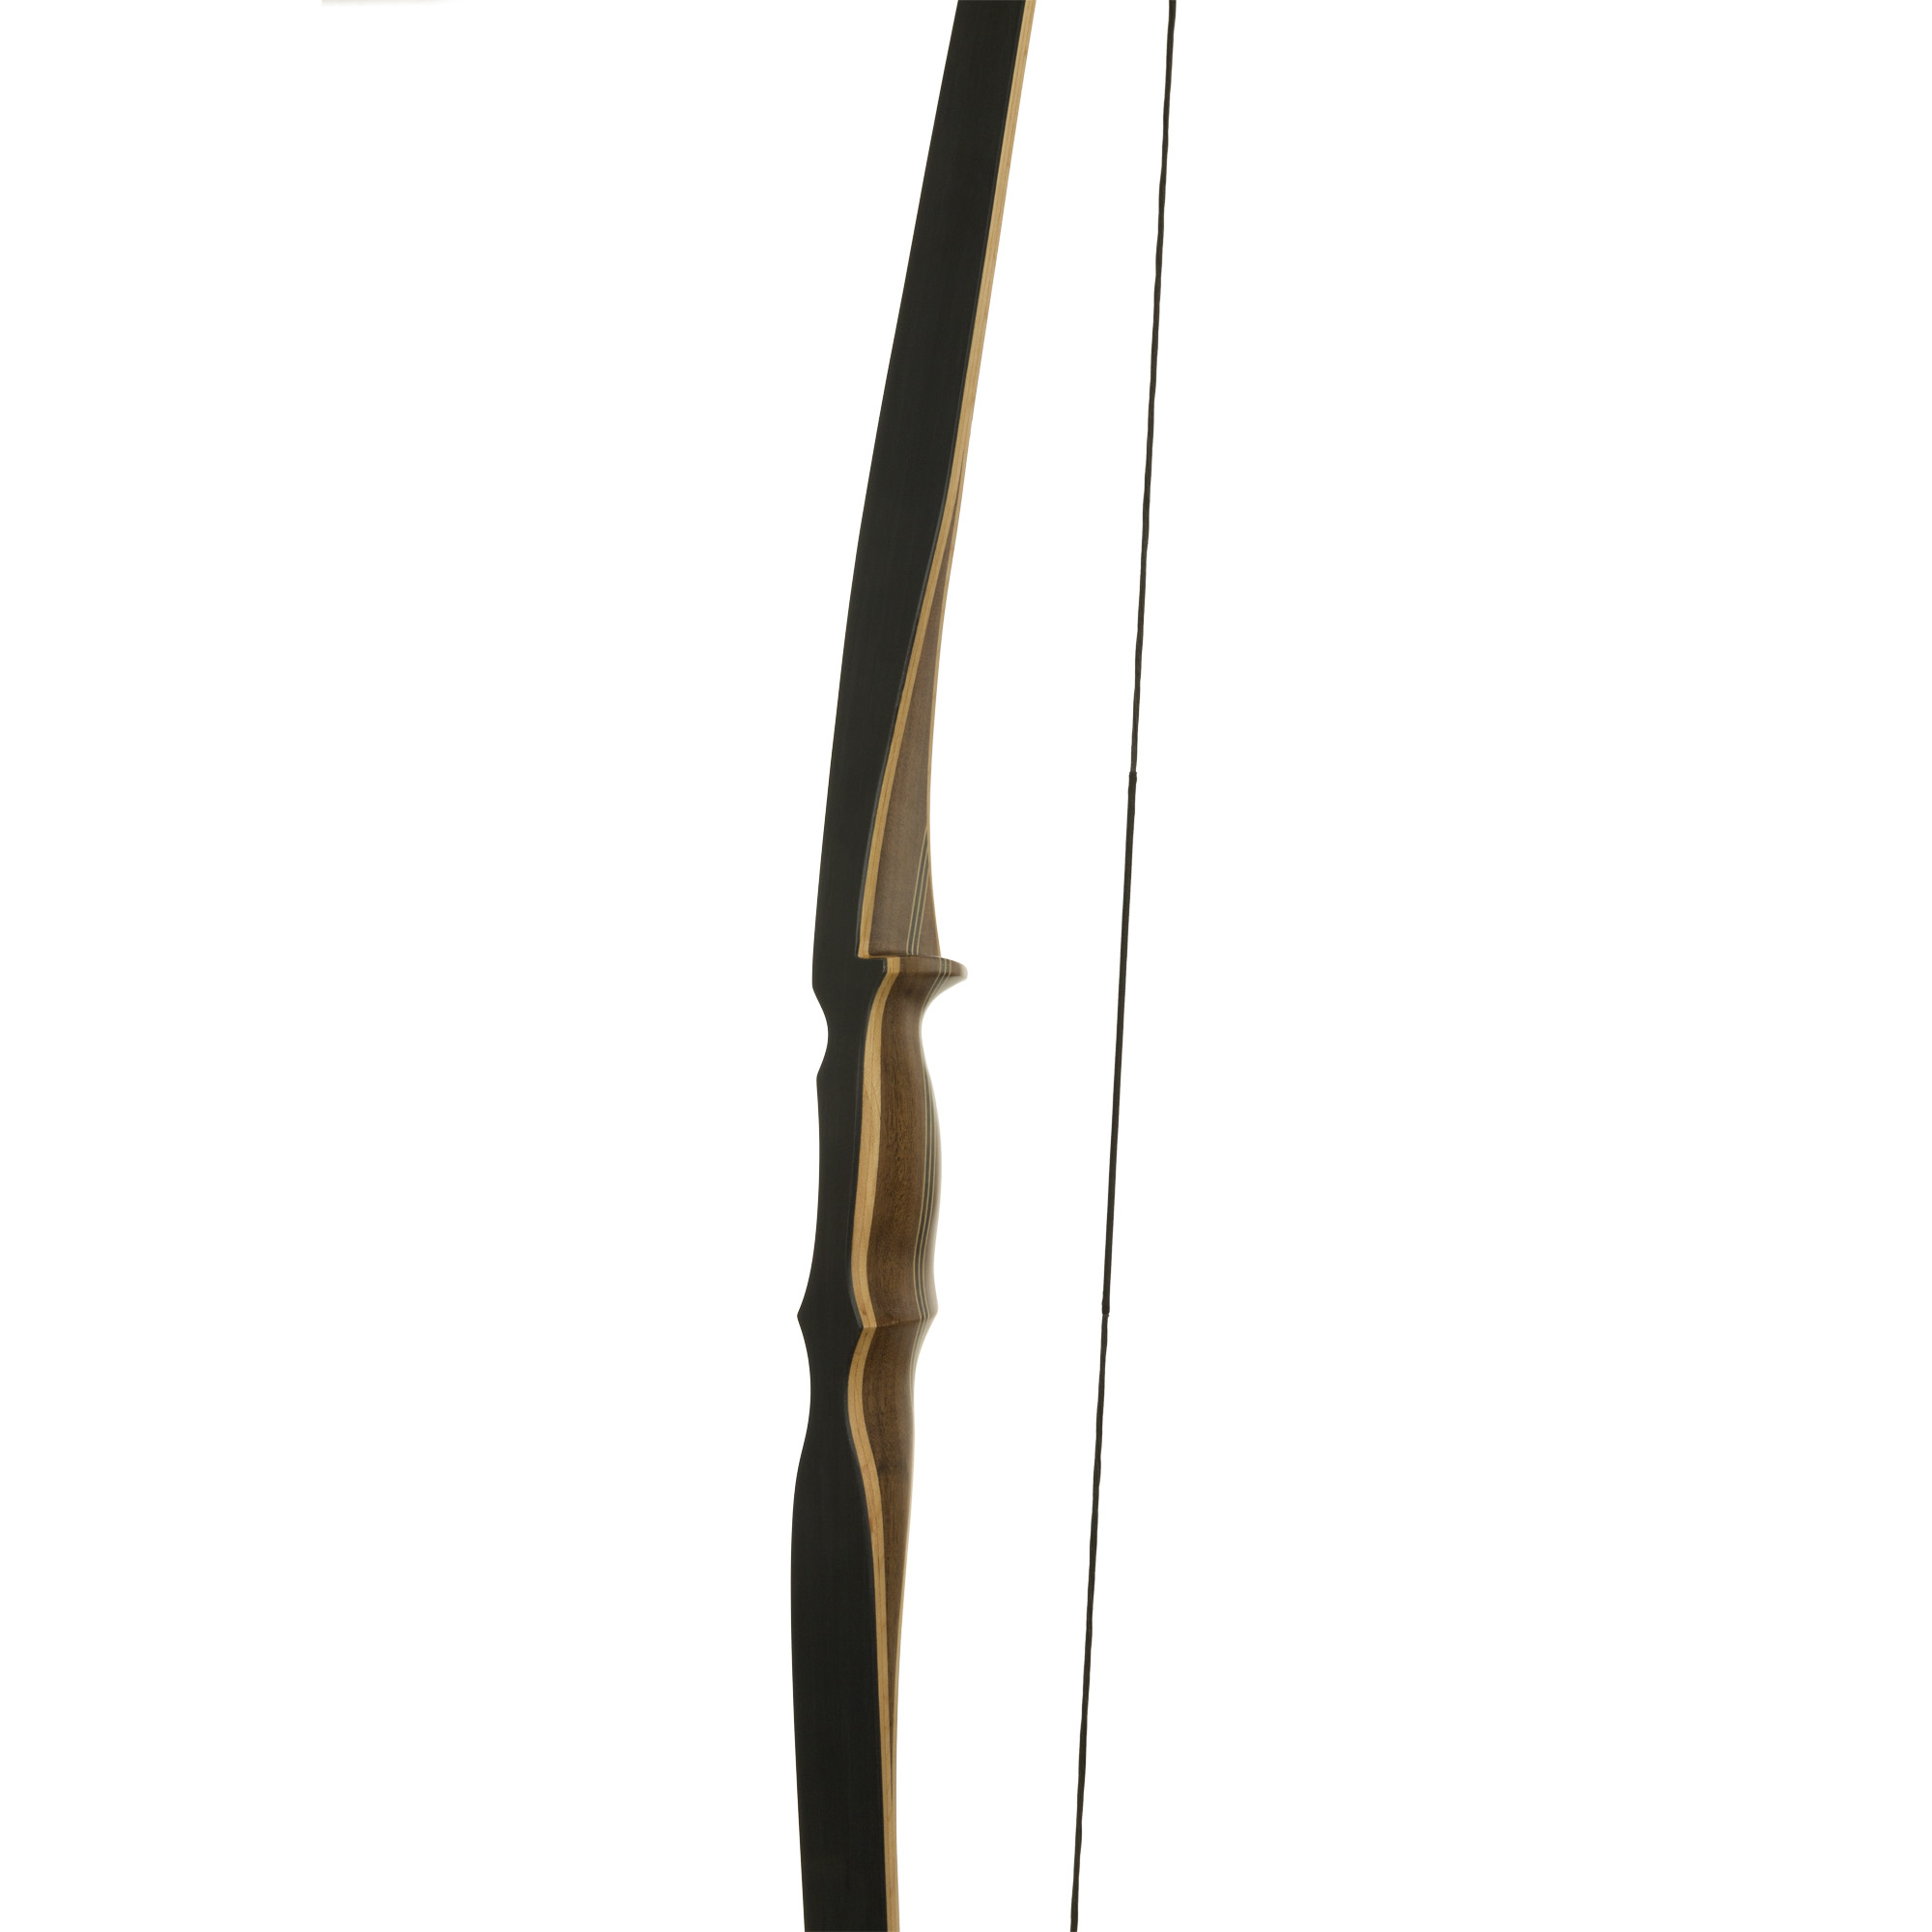 October Mountain Products OMP1706855 Ozark Hunter 68" 55 LB RH Archery Longbow for sale online 